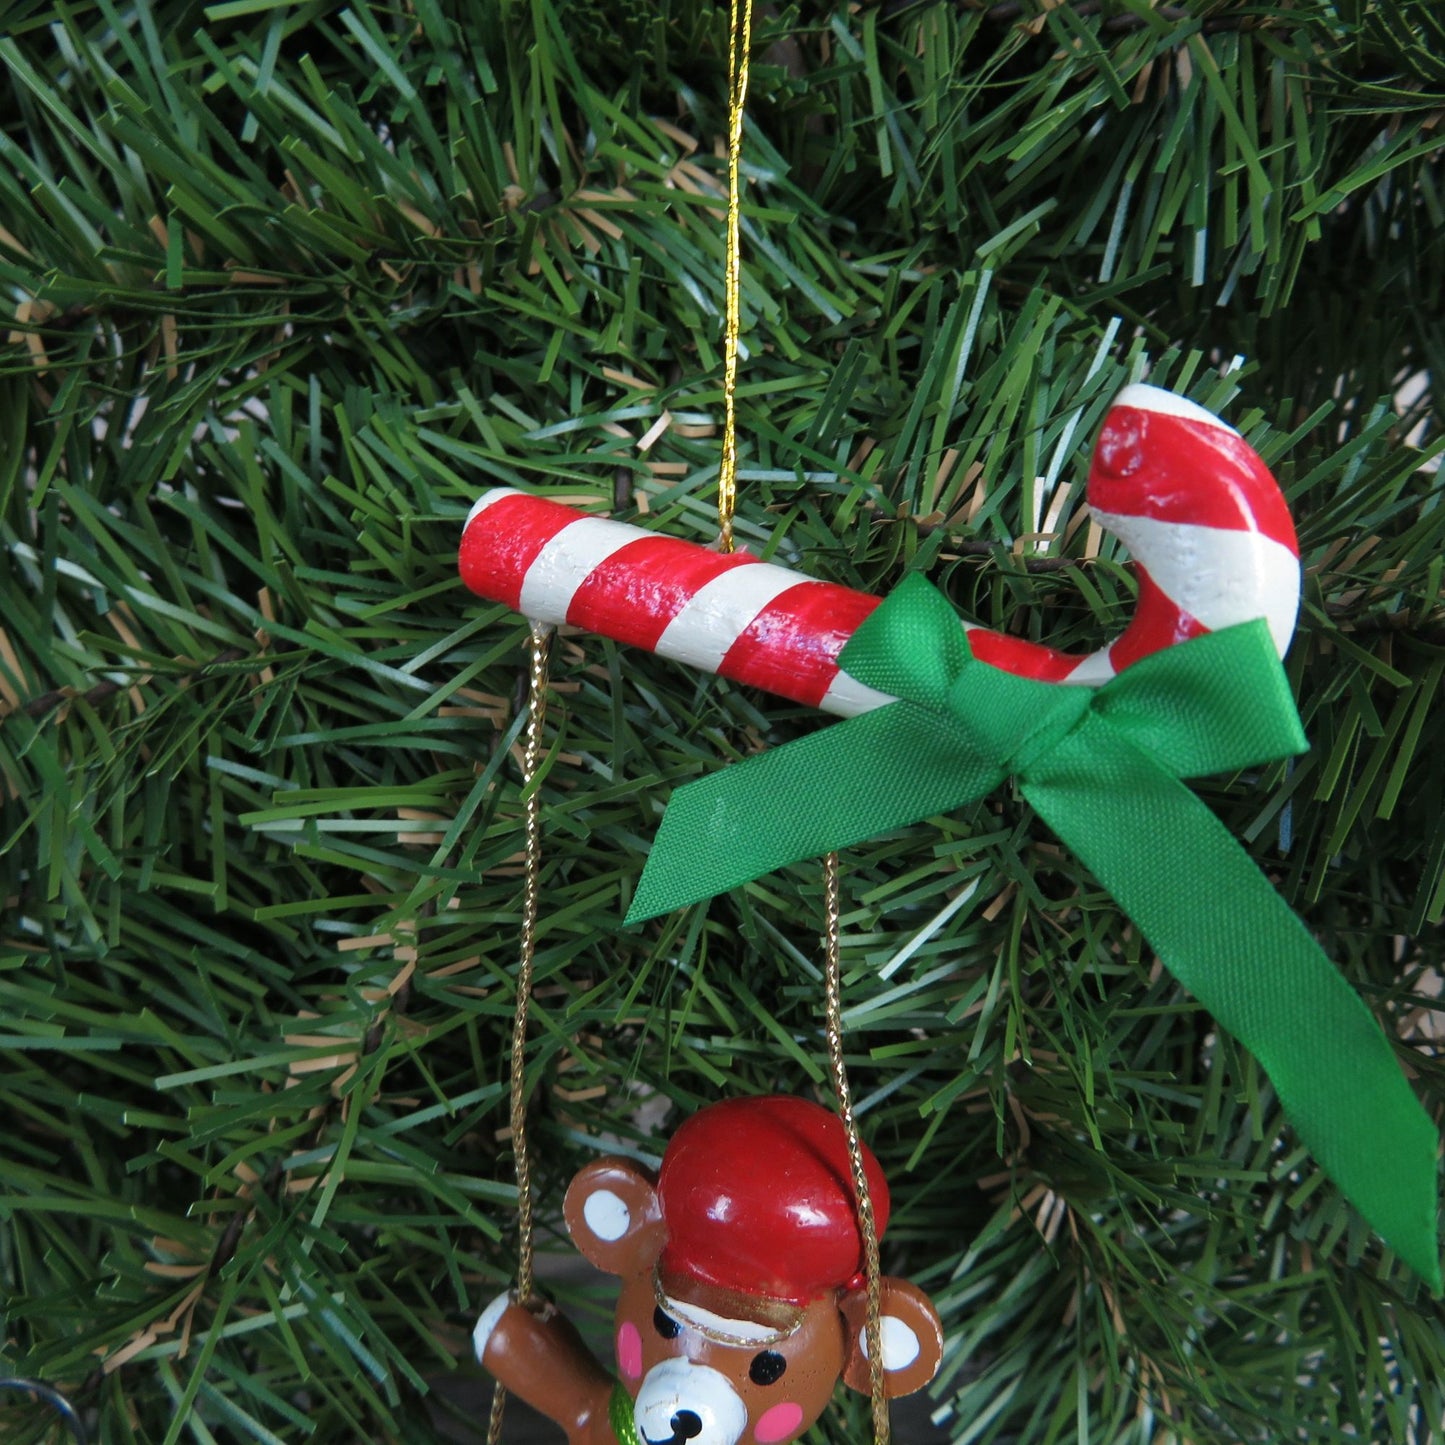 Bear on Candy Cane Swing Wood Ornament Vintage Wooden Teddy Bear With Hat Swinging Christmas Ornament